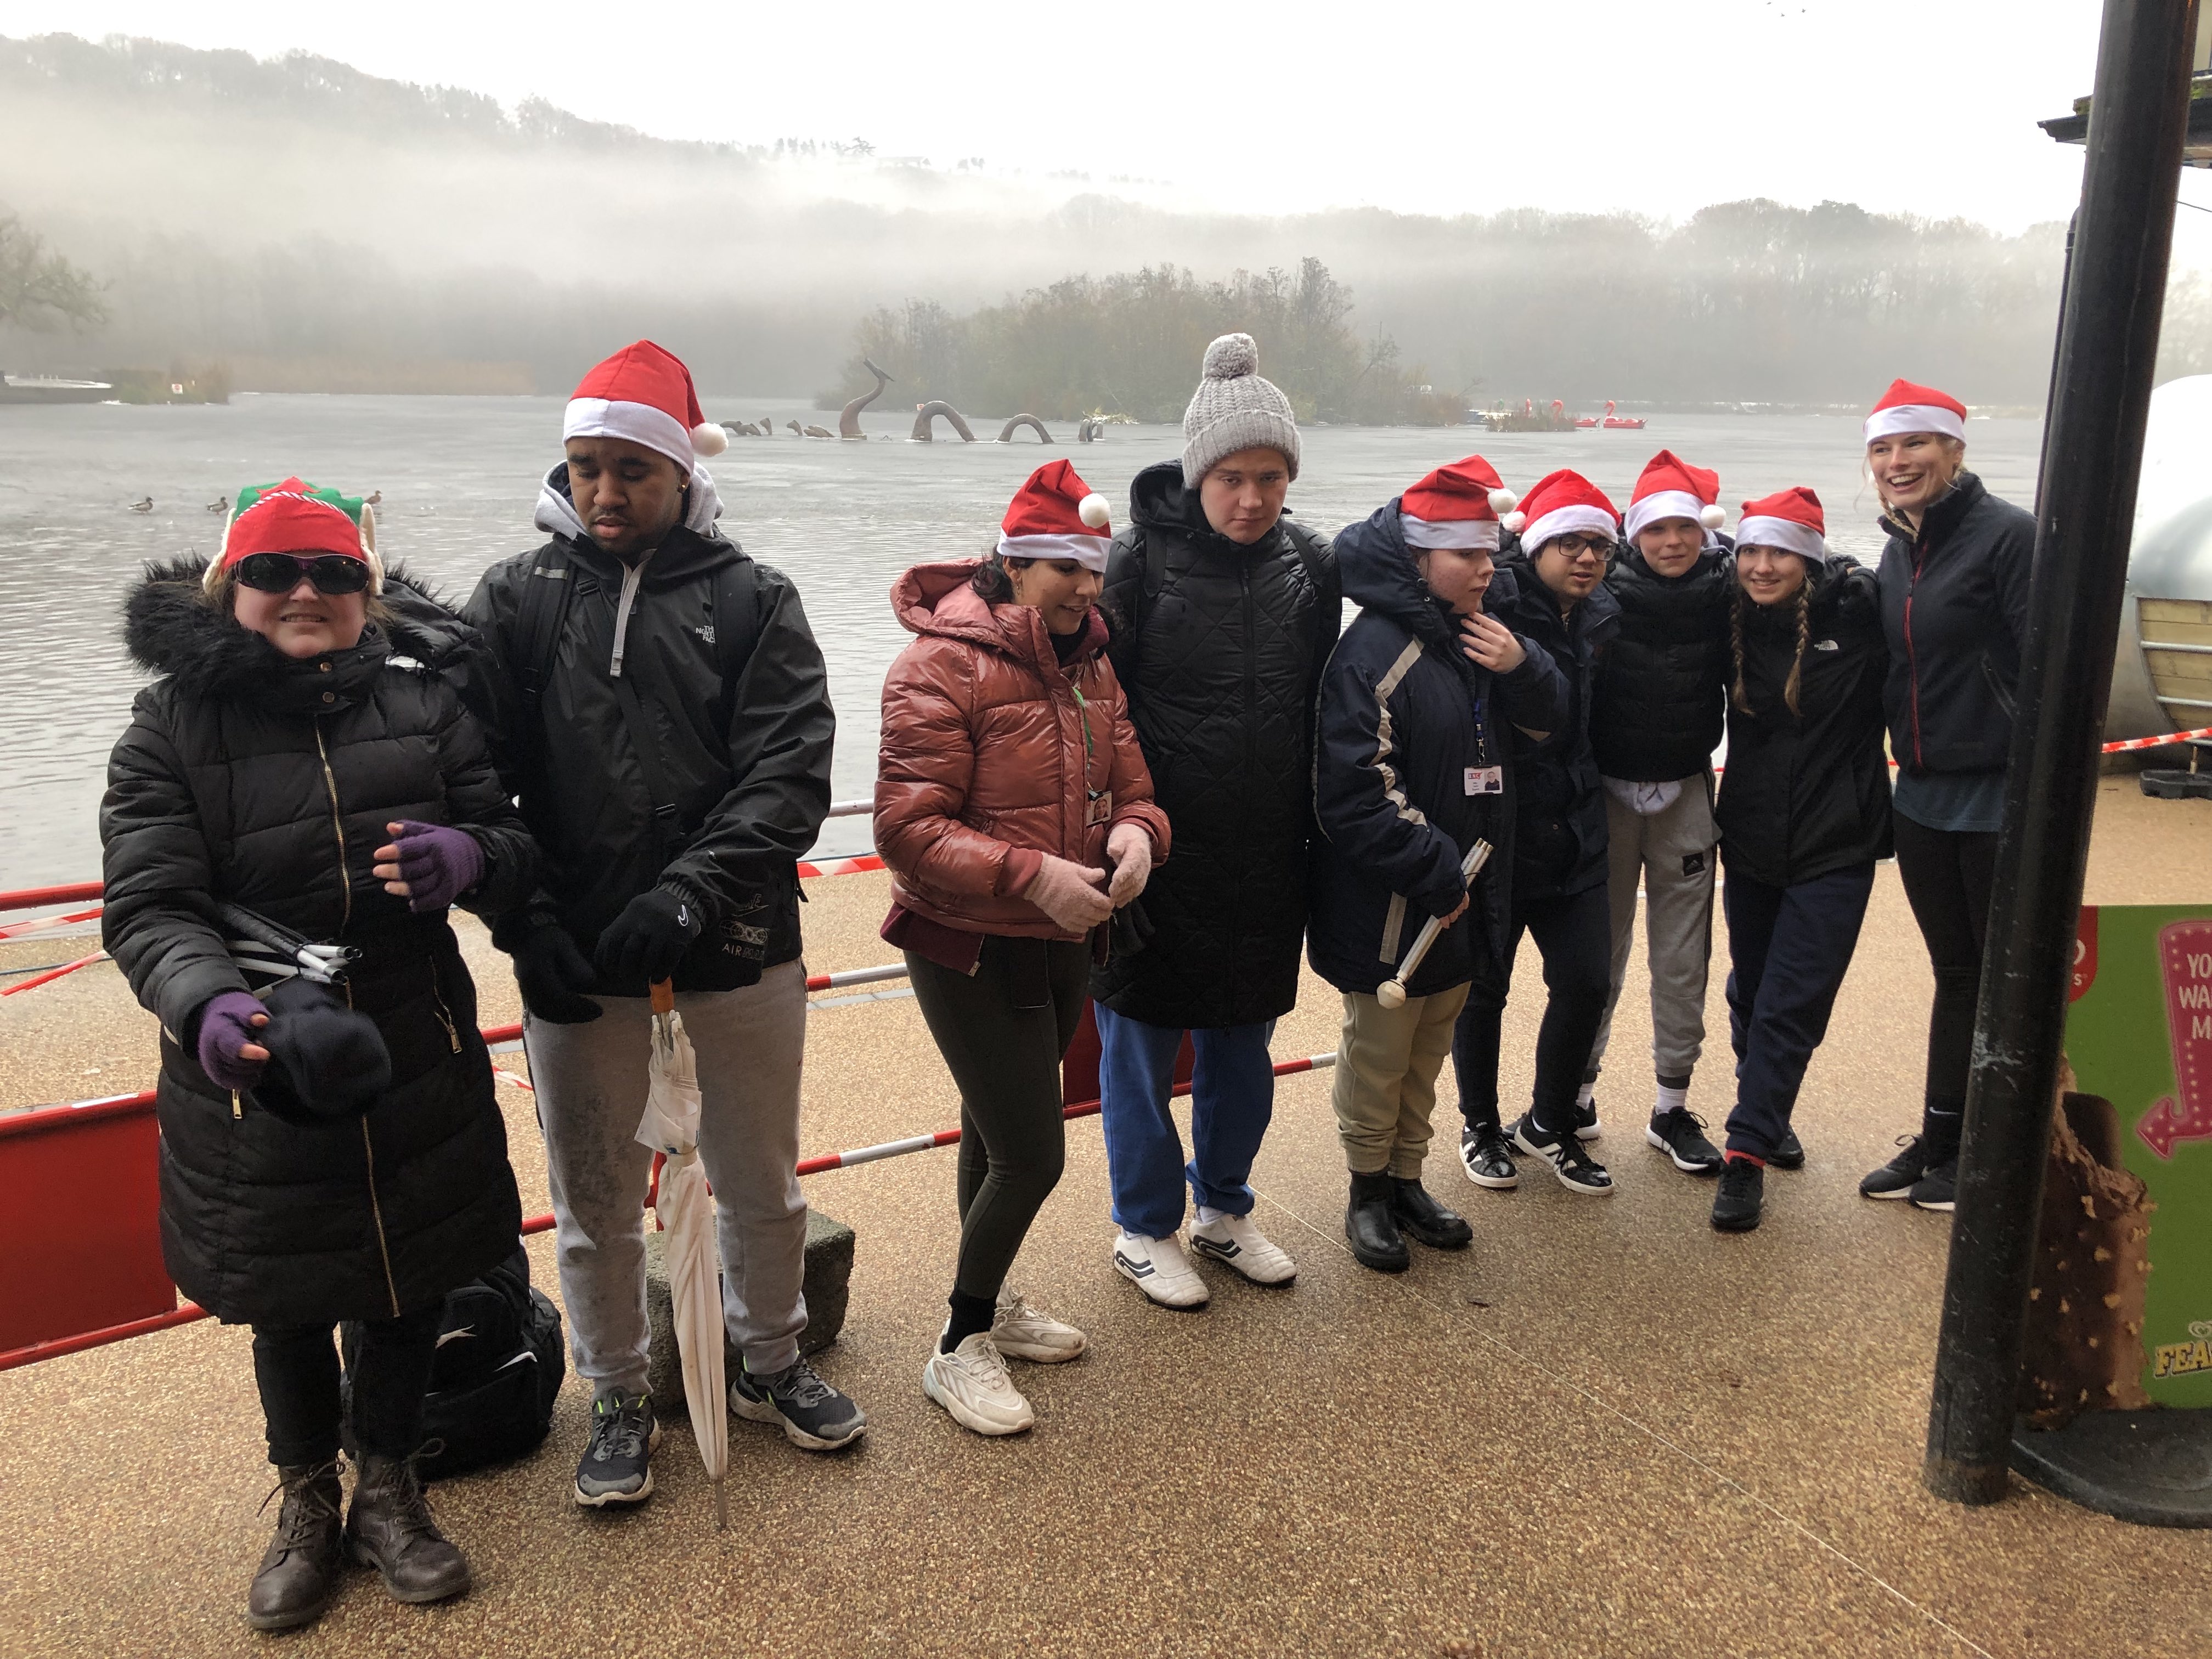 The students stand at the side of the lake wearing Santa hats and smiling